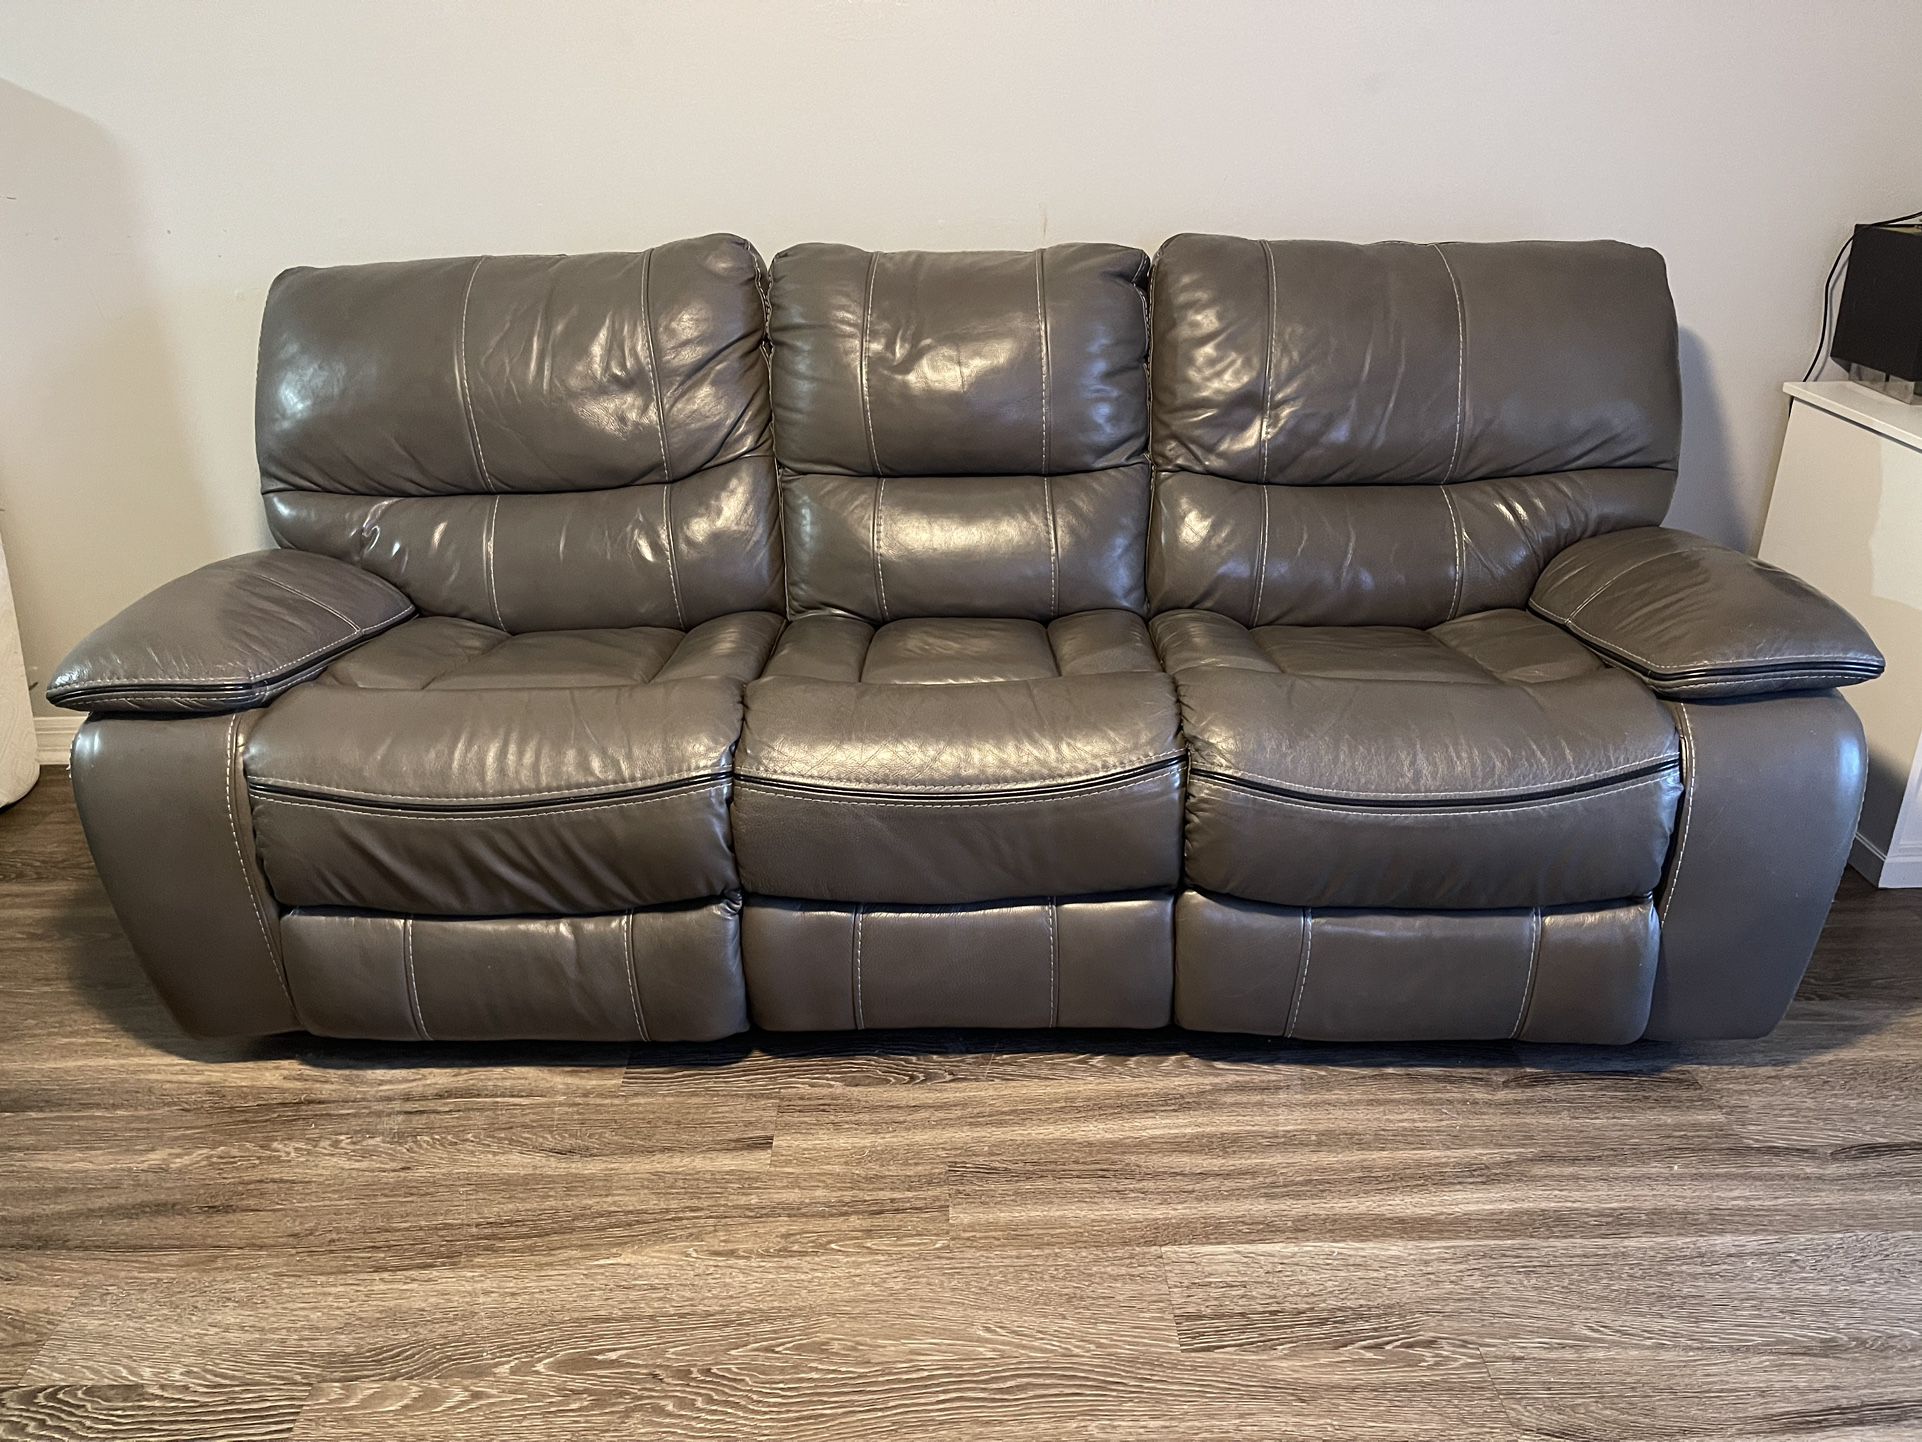 Recliner Leather Sofa $550